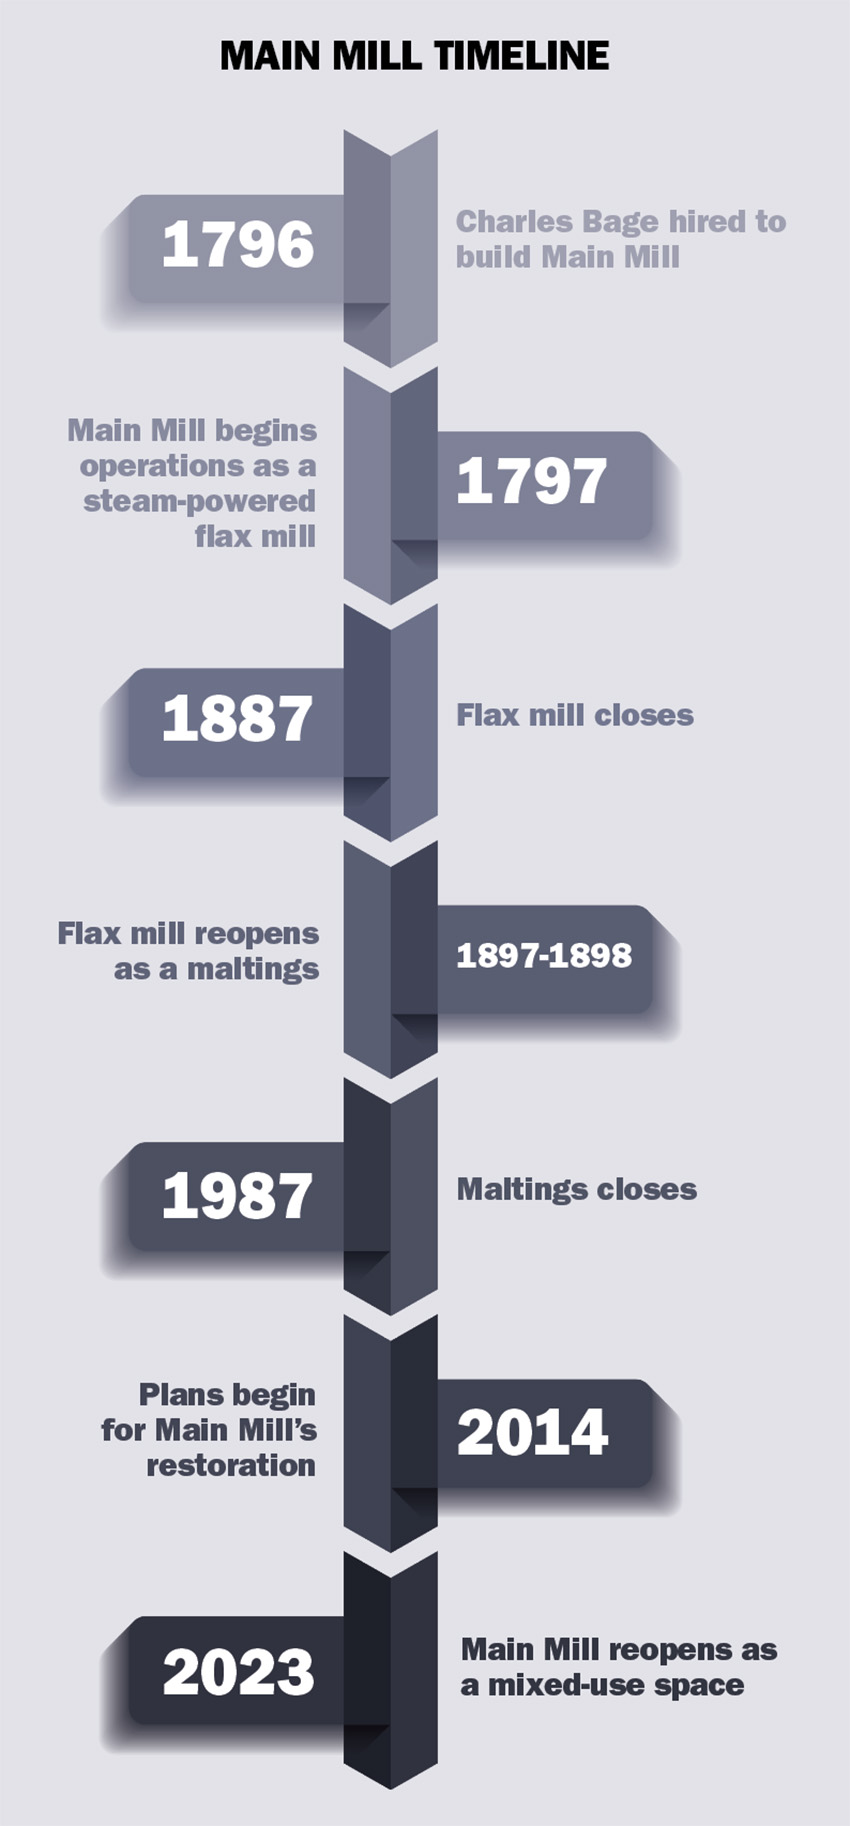 The image is a timeline that depicts the stages of development for a mill turned office space.